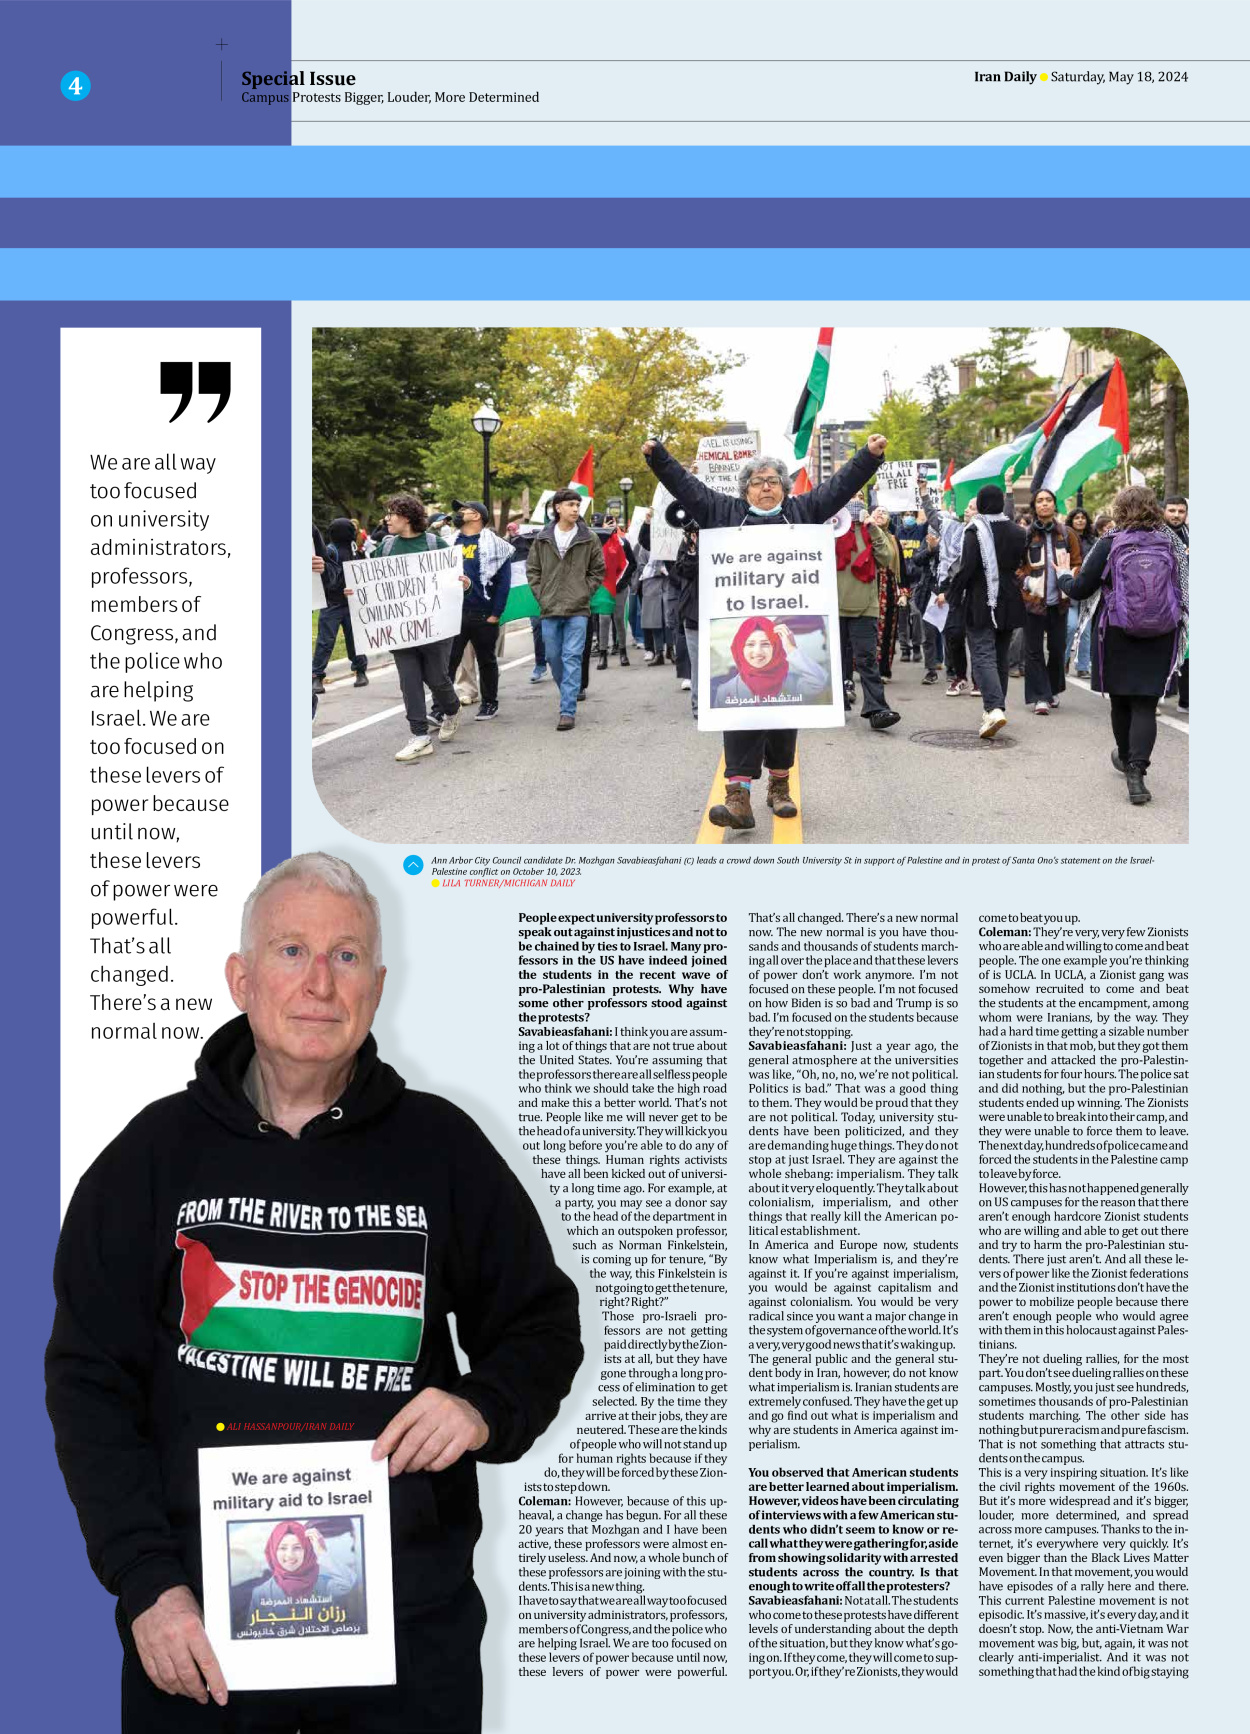 Iran Daily - Number Seven Thousand Five Hundred and Sixty - 18 May 2024 - Page 4